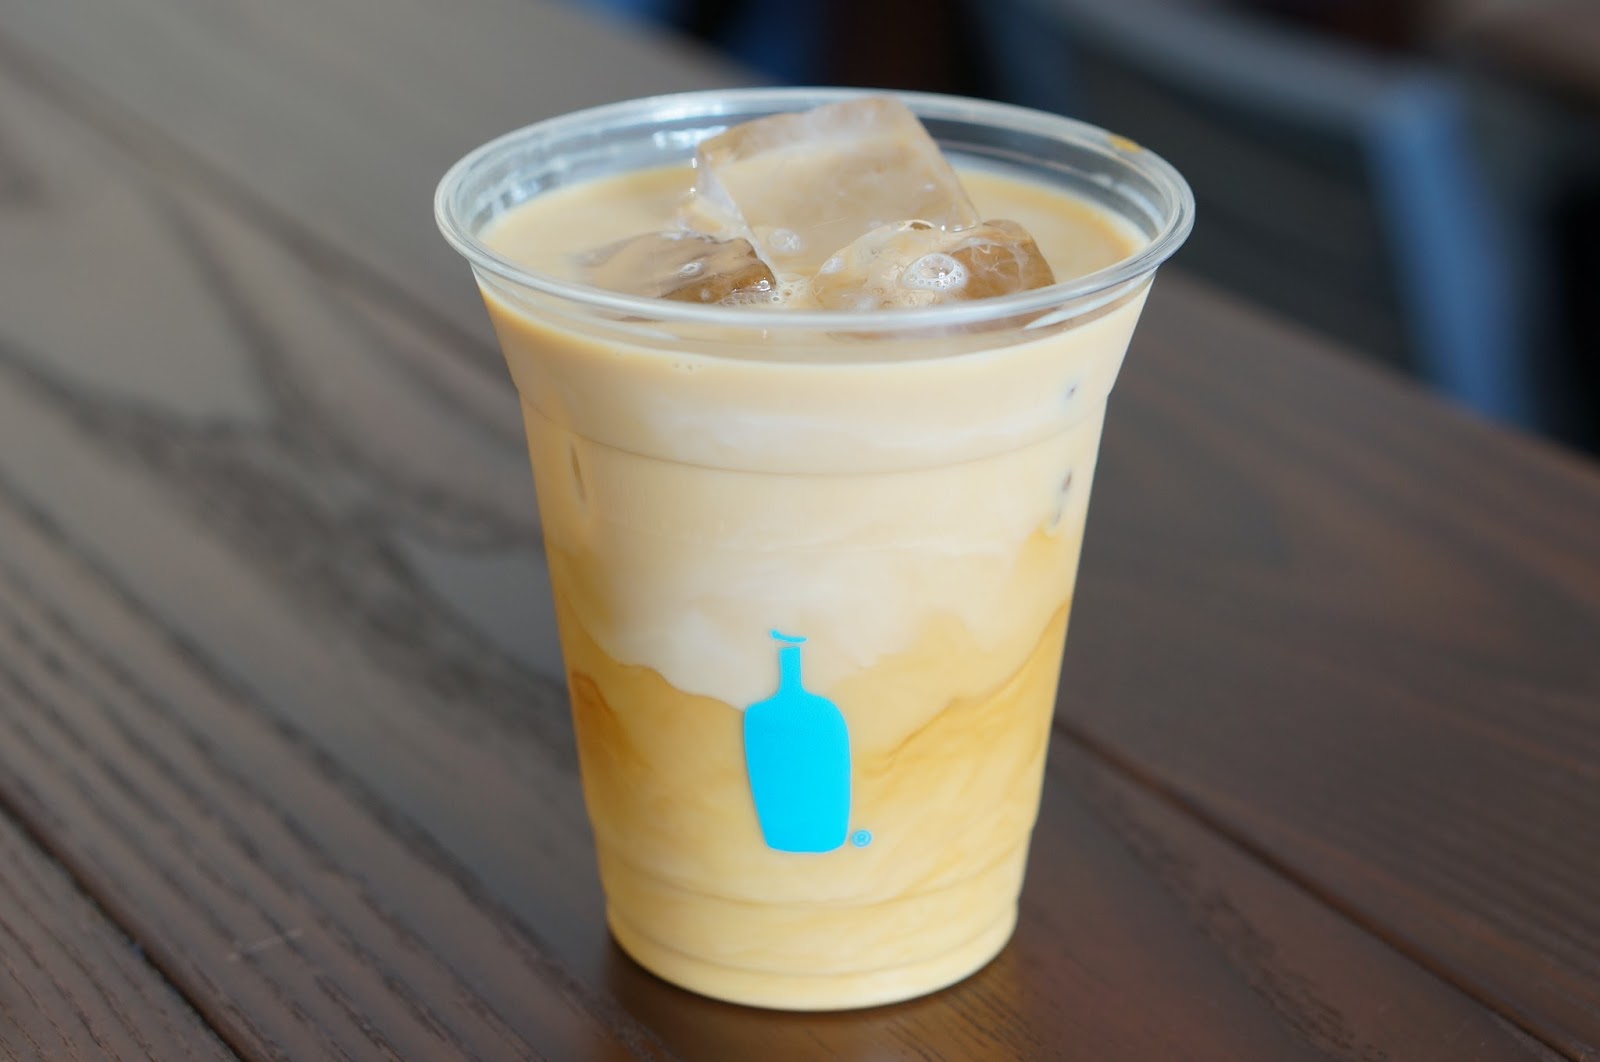 Why Blue Bottle Coffee Yanked All Its Iced-Coffee Cups